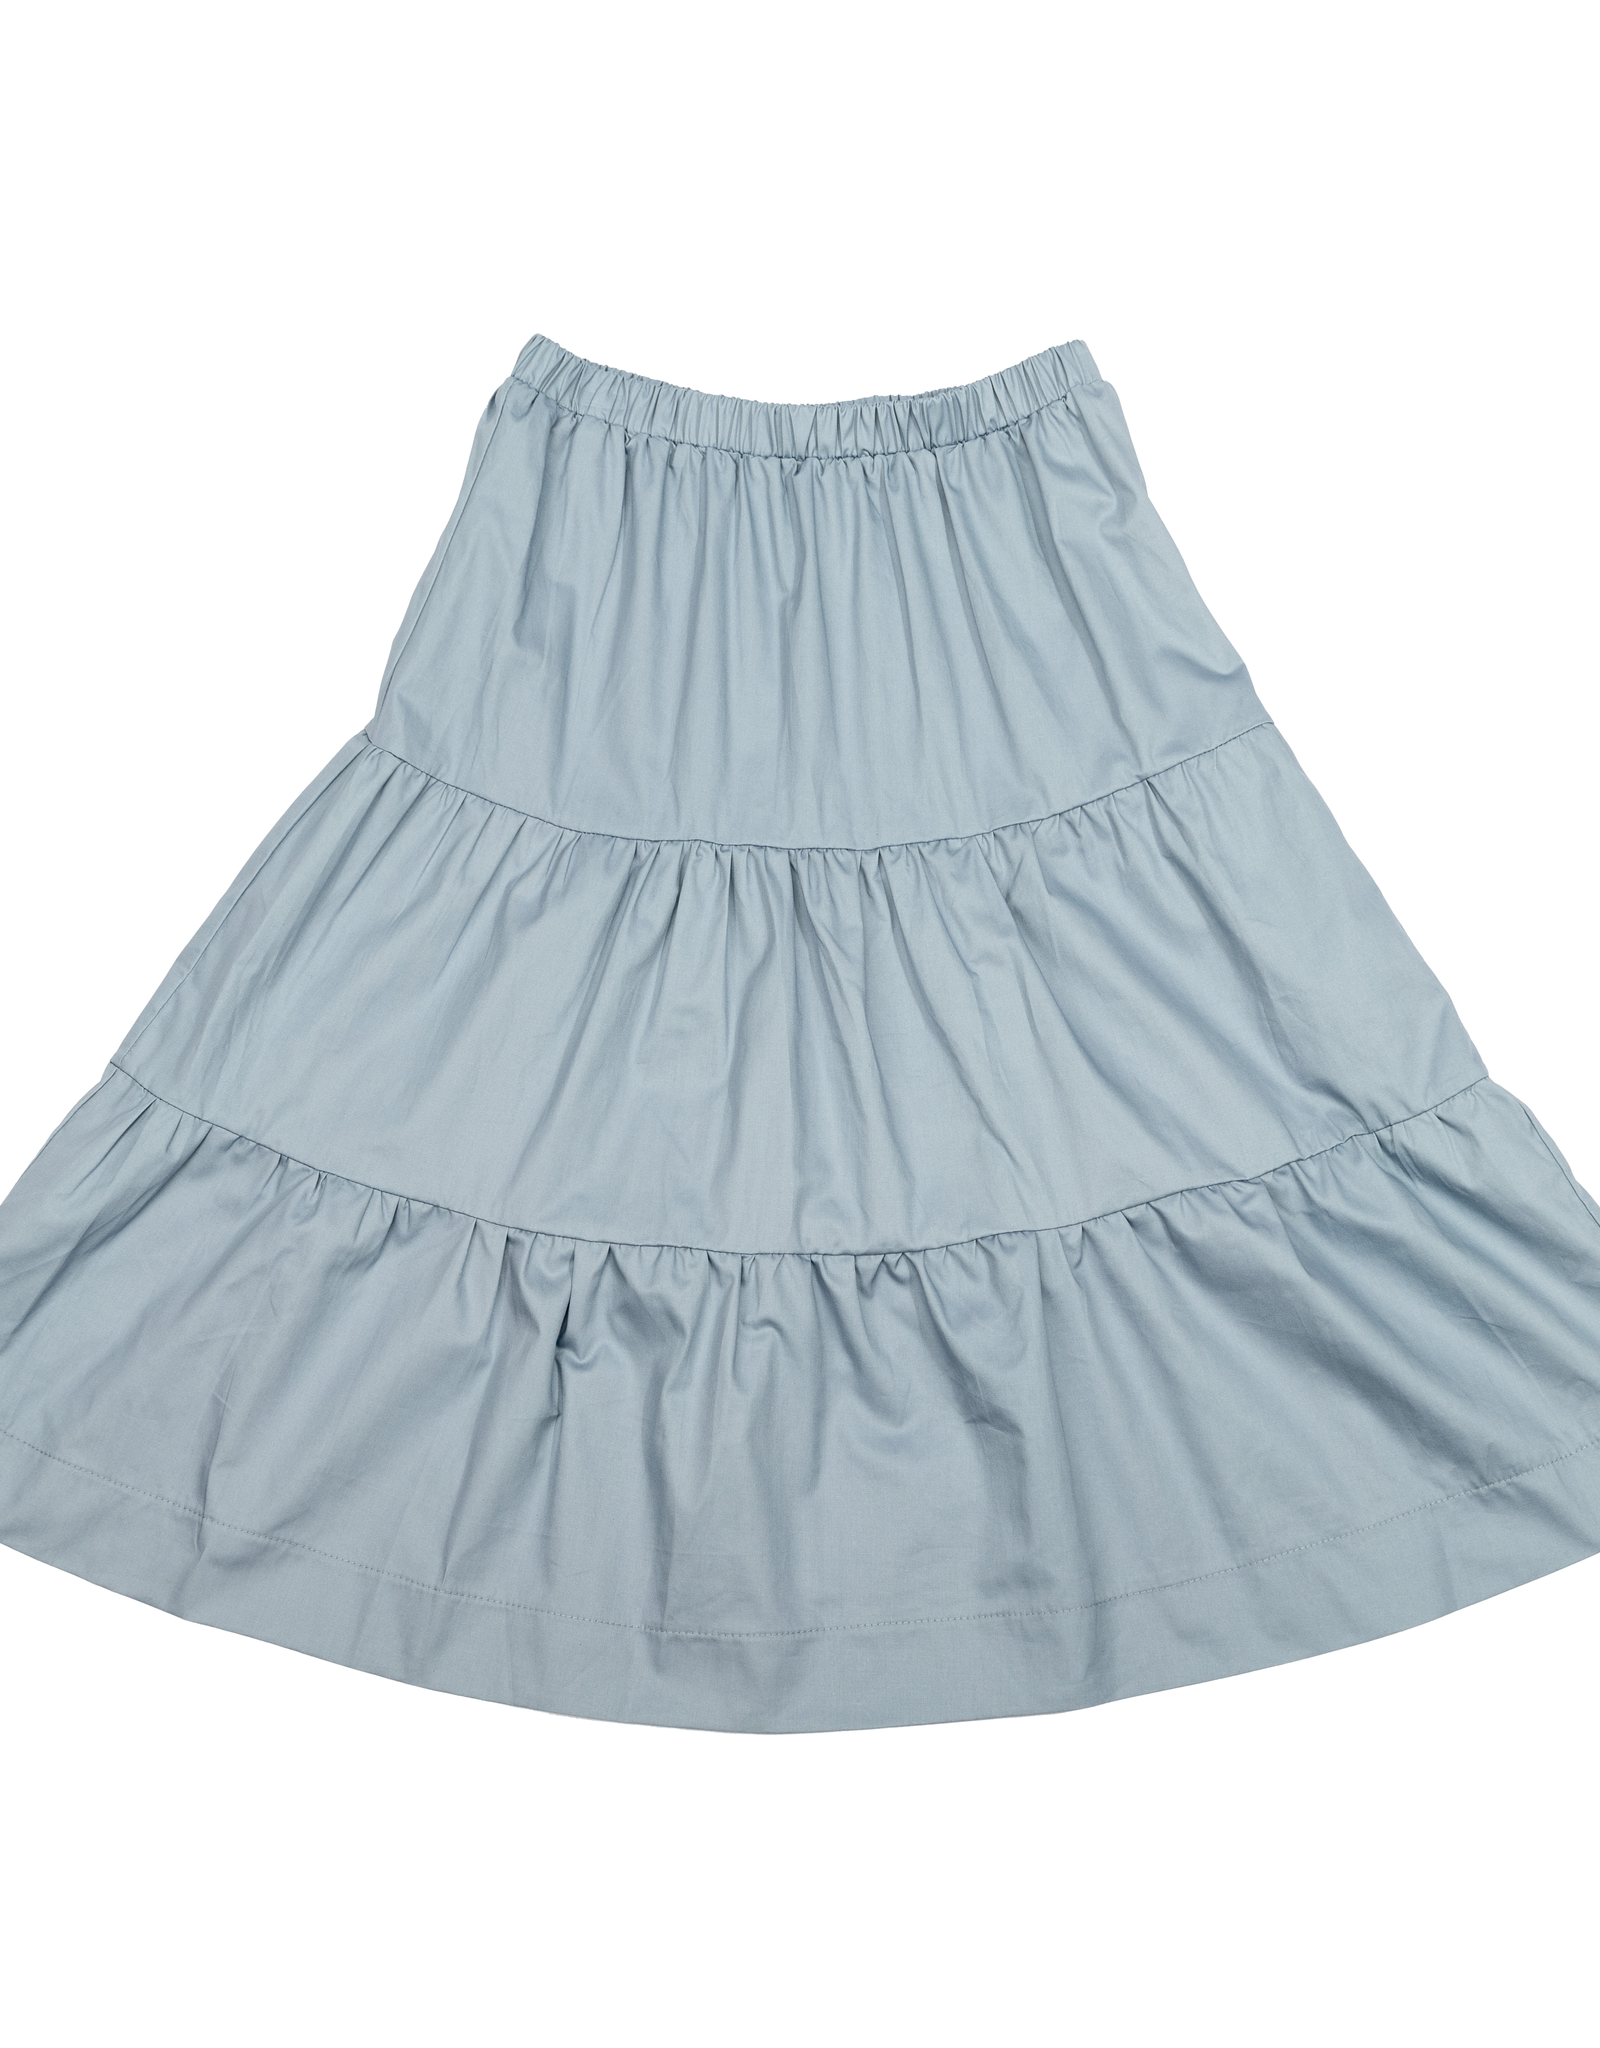 UNCLEAR Unclear TEEN Tiered Belvedere Skirt